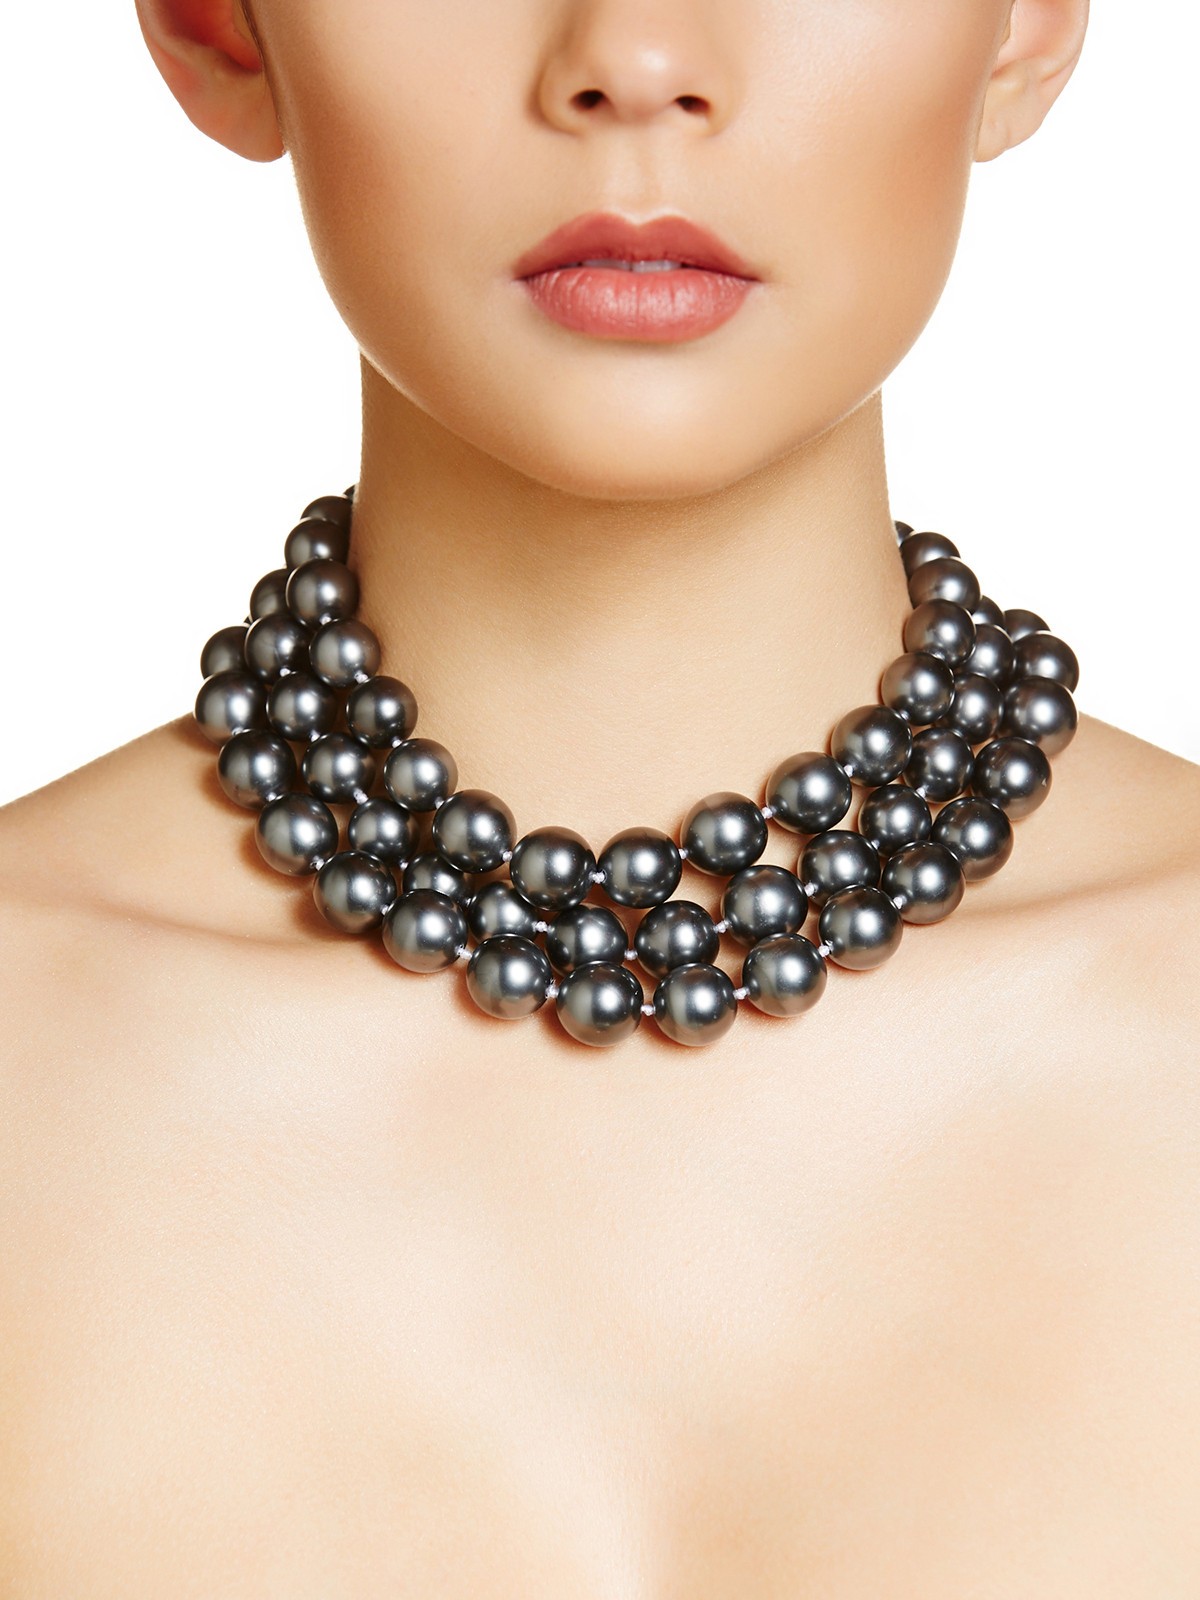 The Modern Chunky Pearl Necklace: How to Style It - PearlsOnly :: PearlsOnly